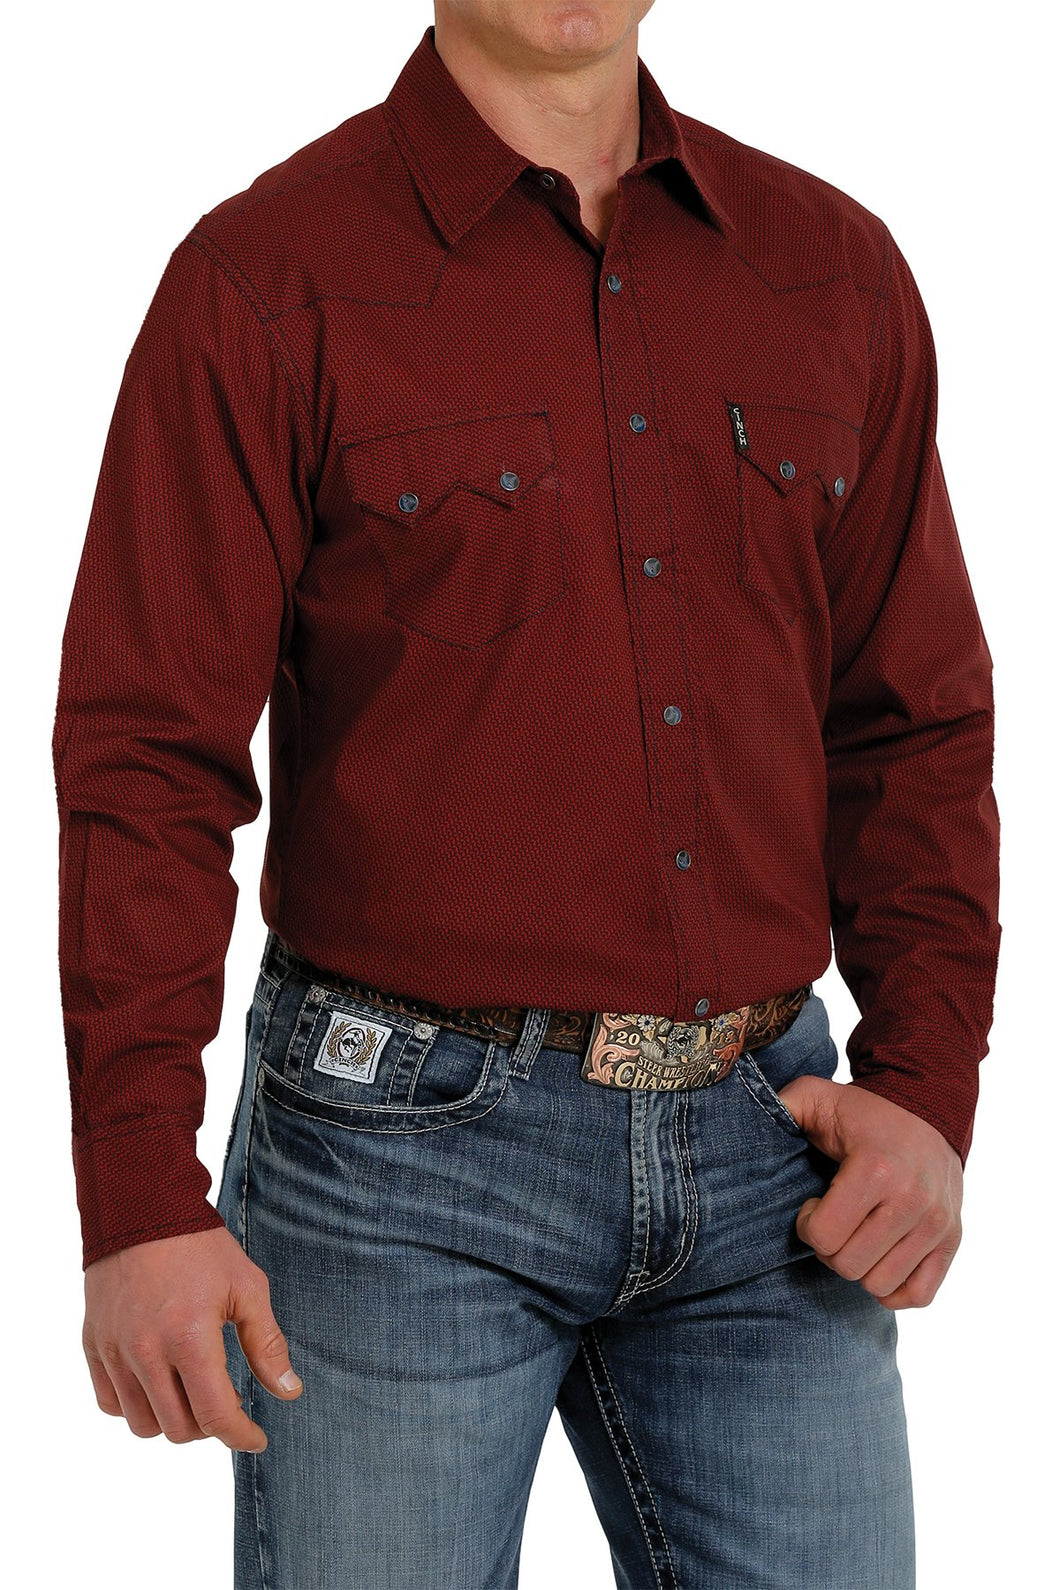 MEN'S MODERN FIT SNAP FRONT WESTERN SHIRT - RED